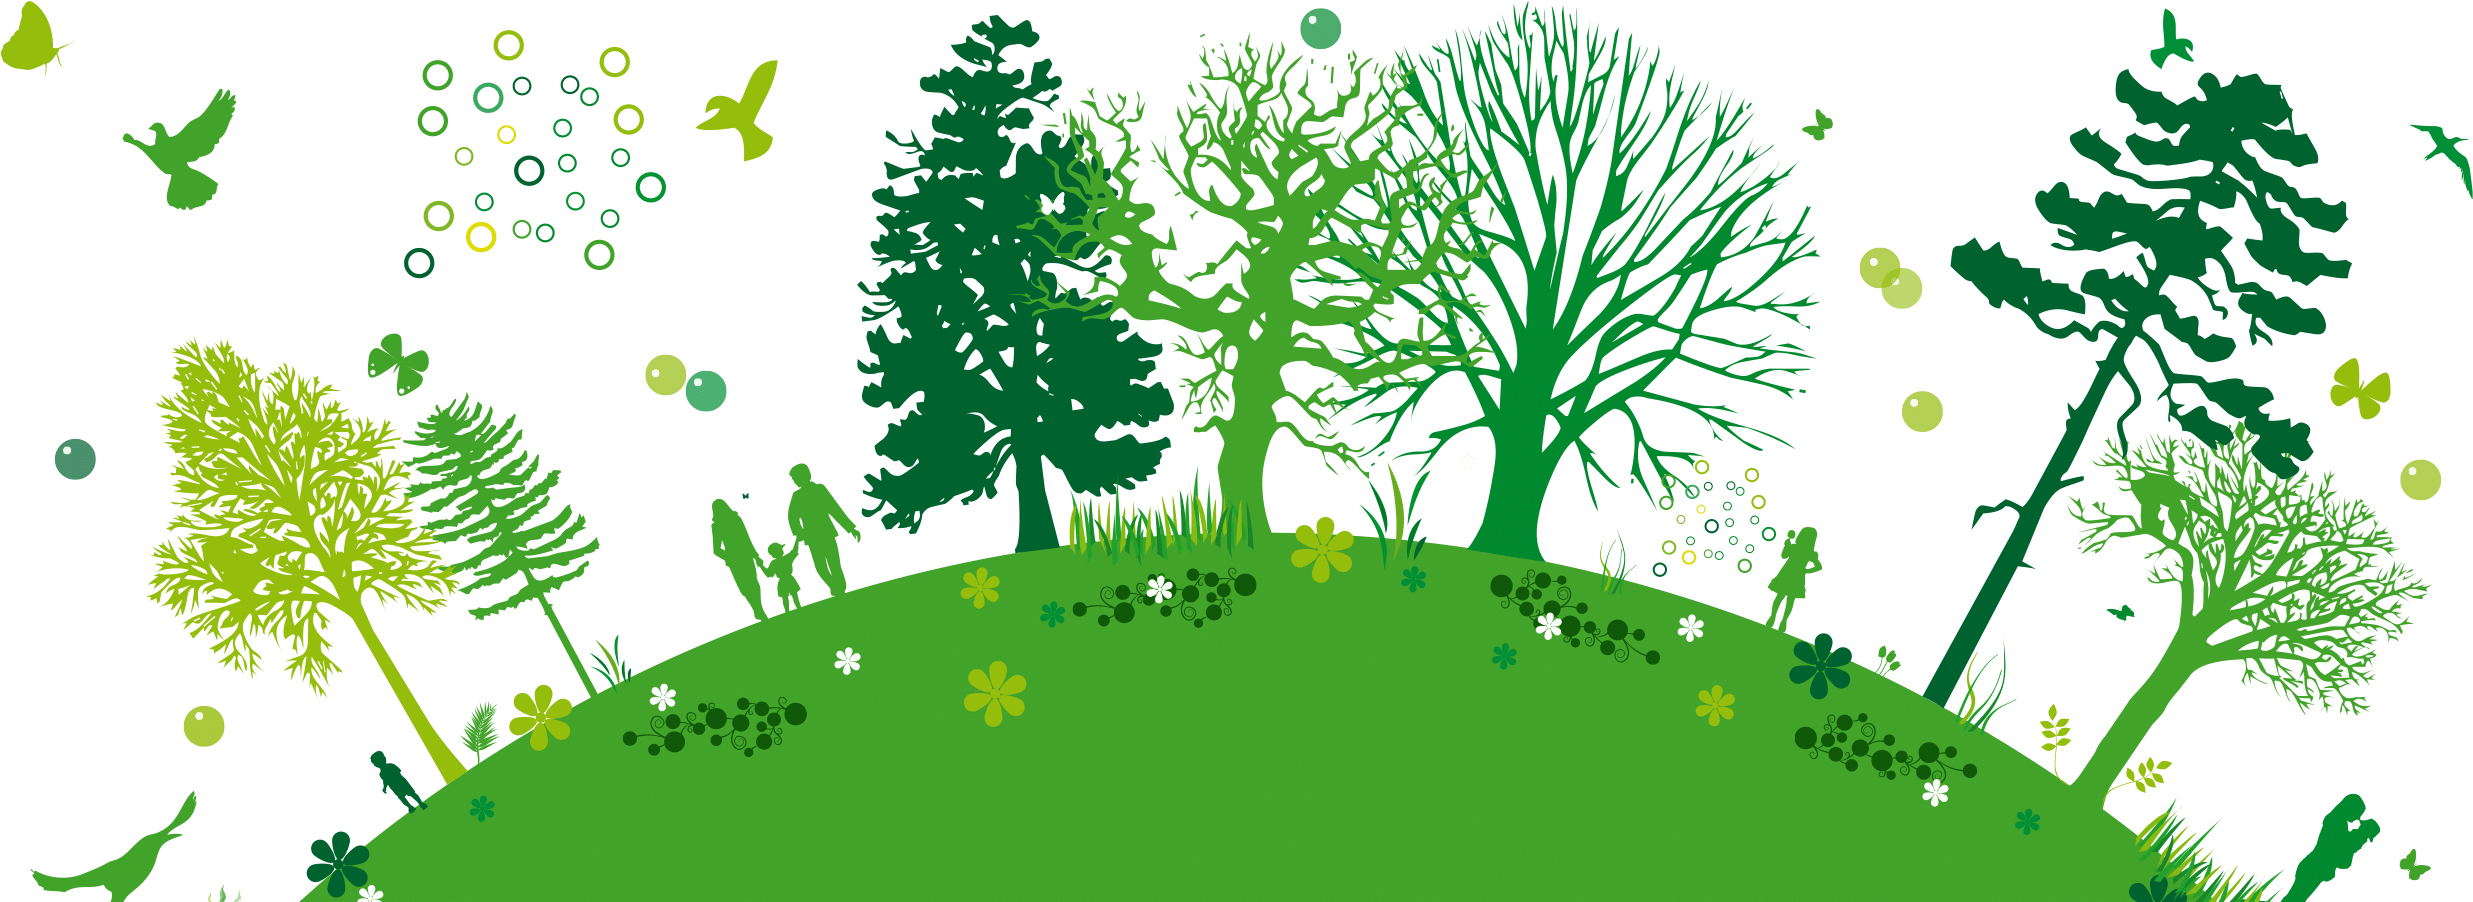 A Green Landscape With Trees And Butterflies